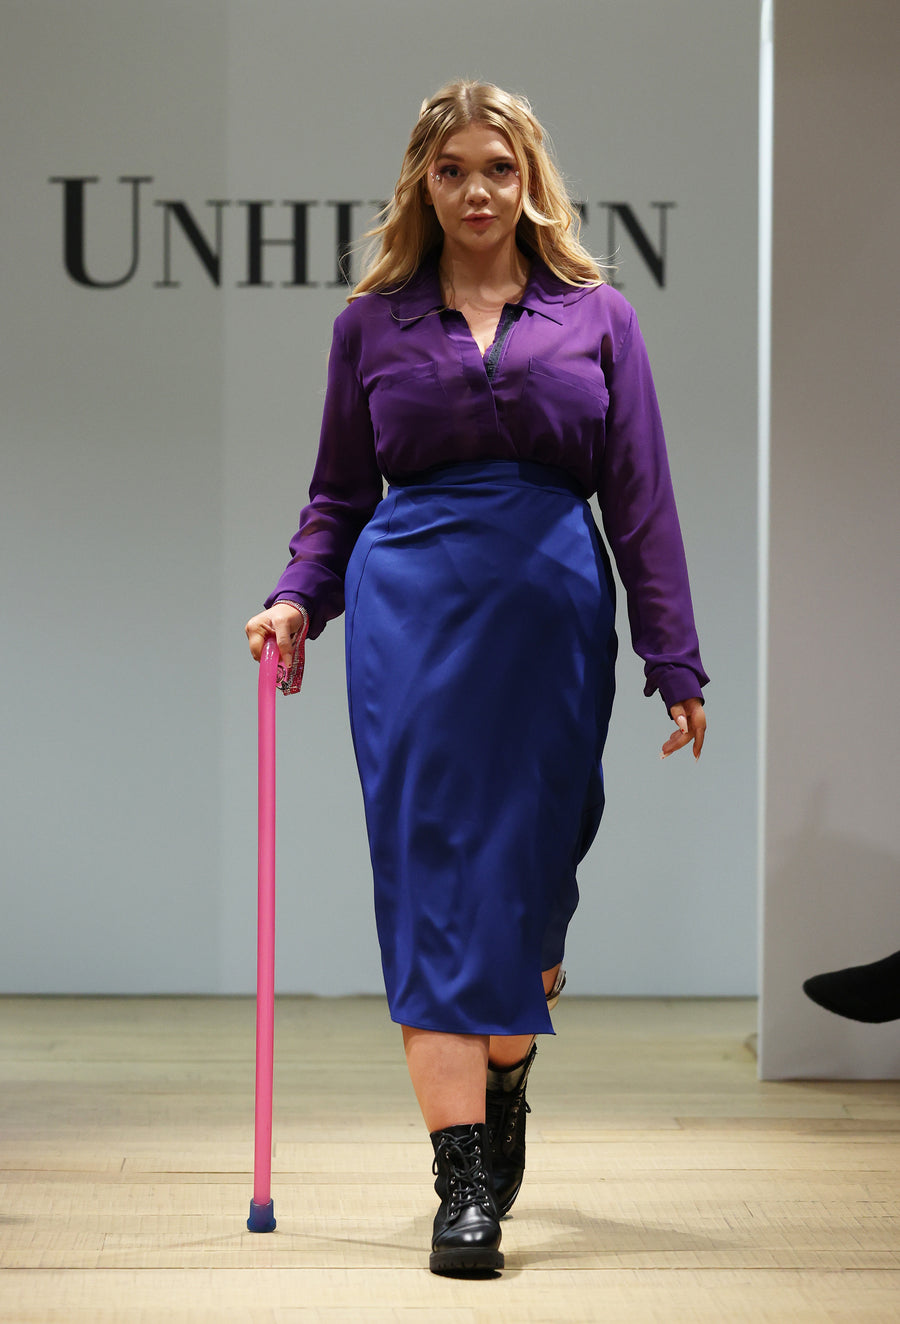 Female presenting model on a runway. They are a white woman with wavy long blonde hair. Wearing a purple chiffon shirt with long sleeves under a blue wrap skirt. They are using a hot pink walking stick and have chunky black boots on. Behind them is a white back drop with Unhidden in black text visible.